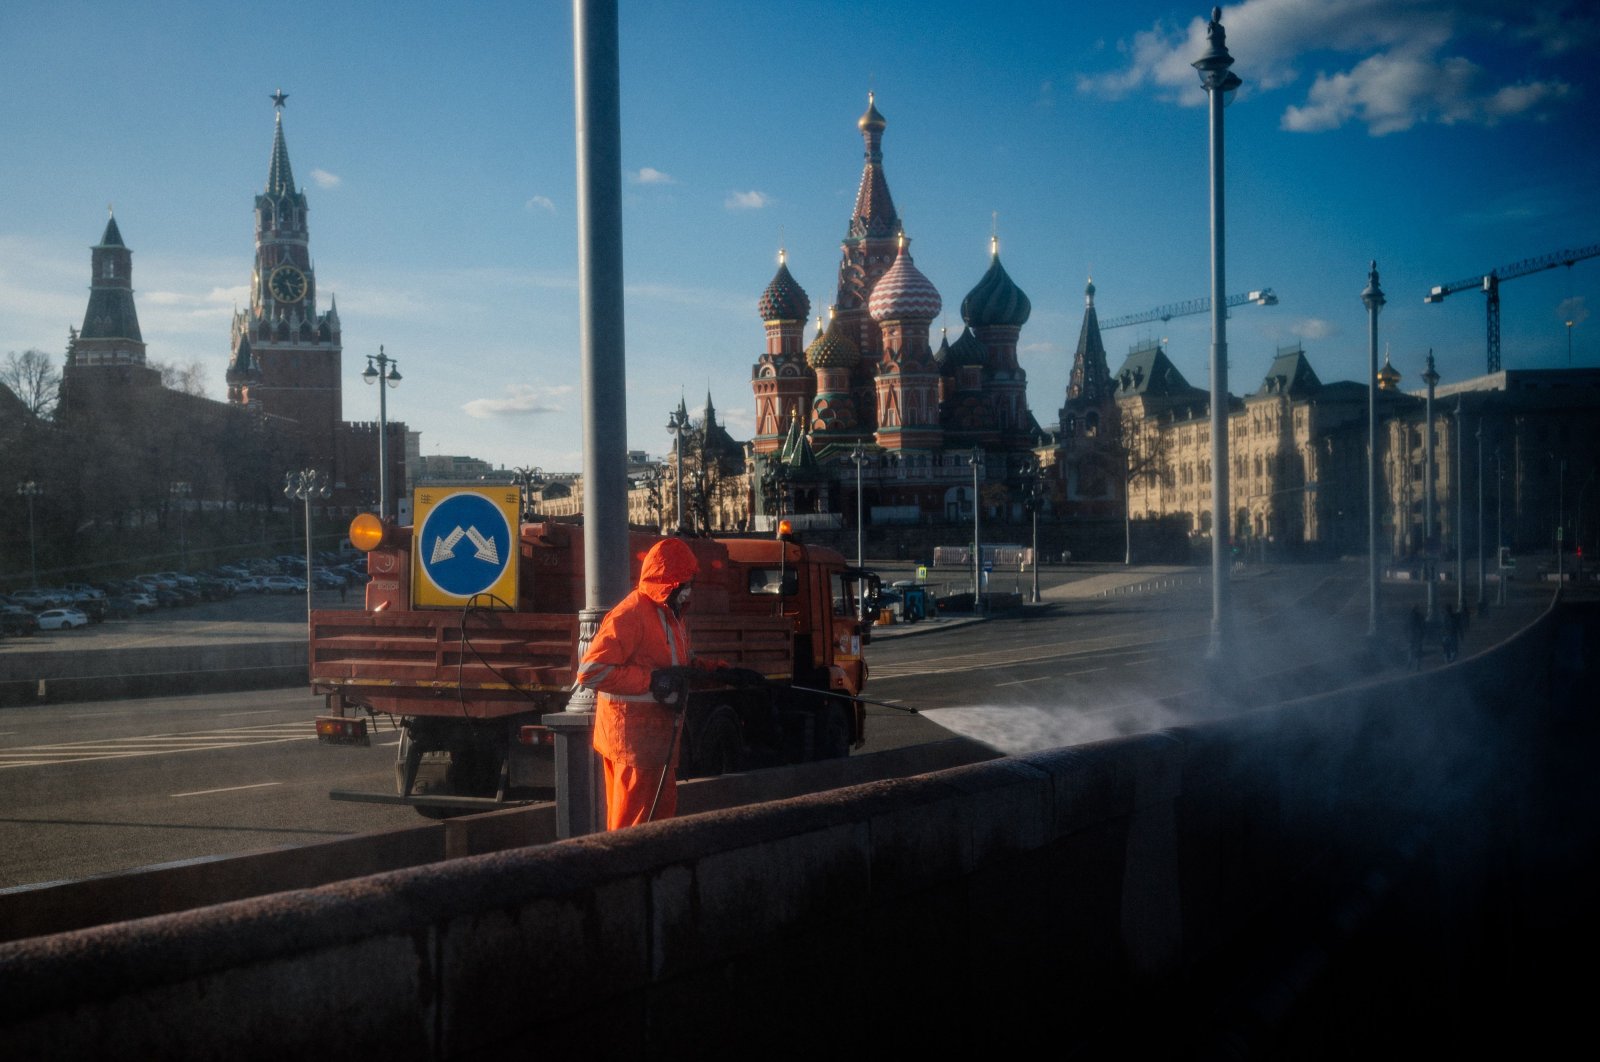 A municipal worker cleans and disinfects a bridge near the Kremlin in downtown Moscow on April 12, 2020, during a strict lockdown in Russia to stop the spread of the novel coronavirus COVID-19. (AFP Photo)